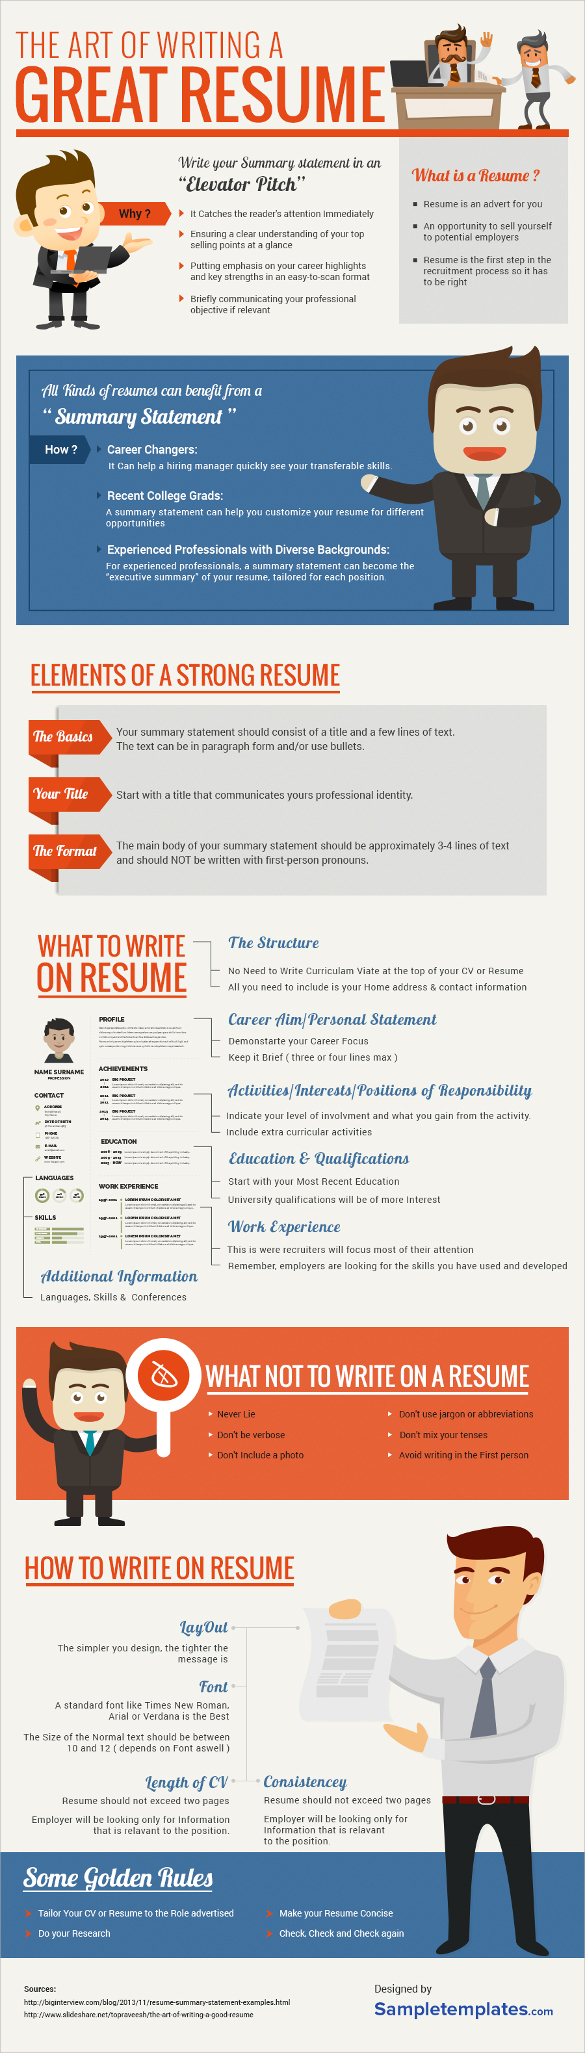 Resume tricks employers reject